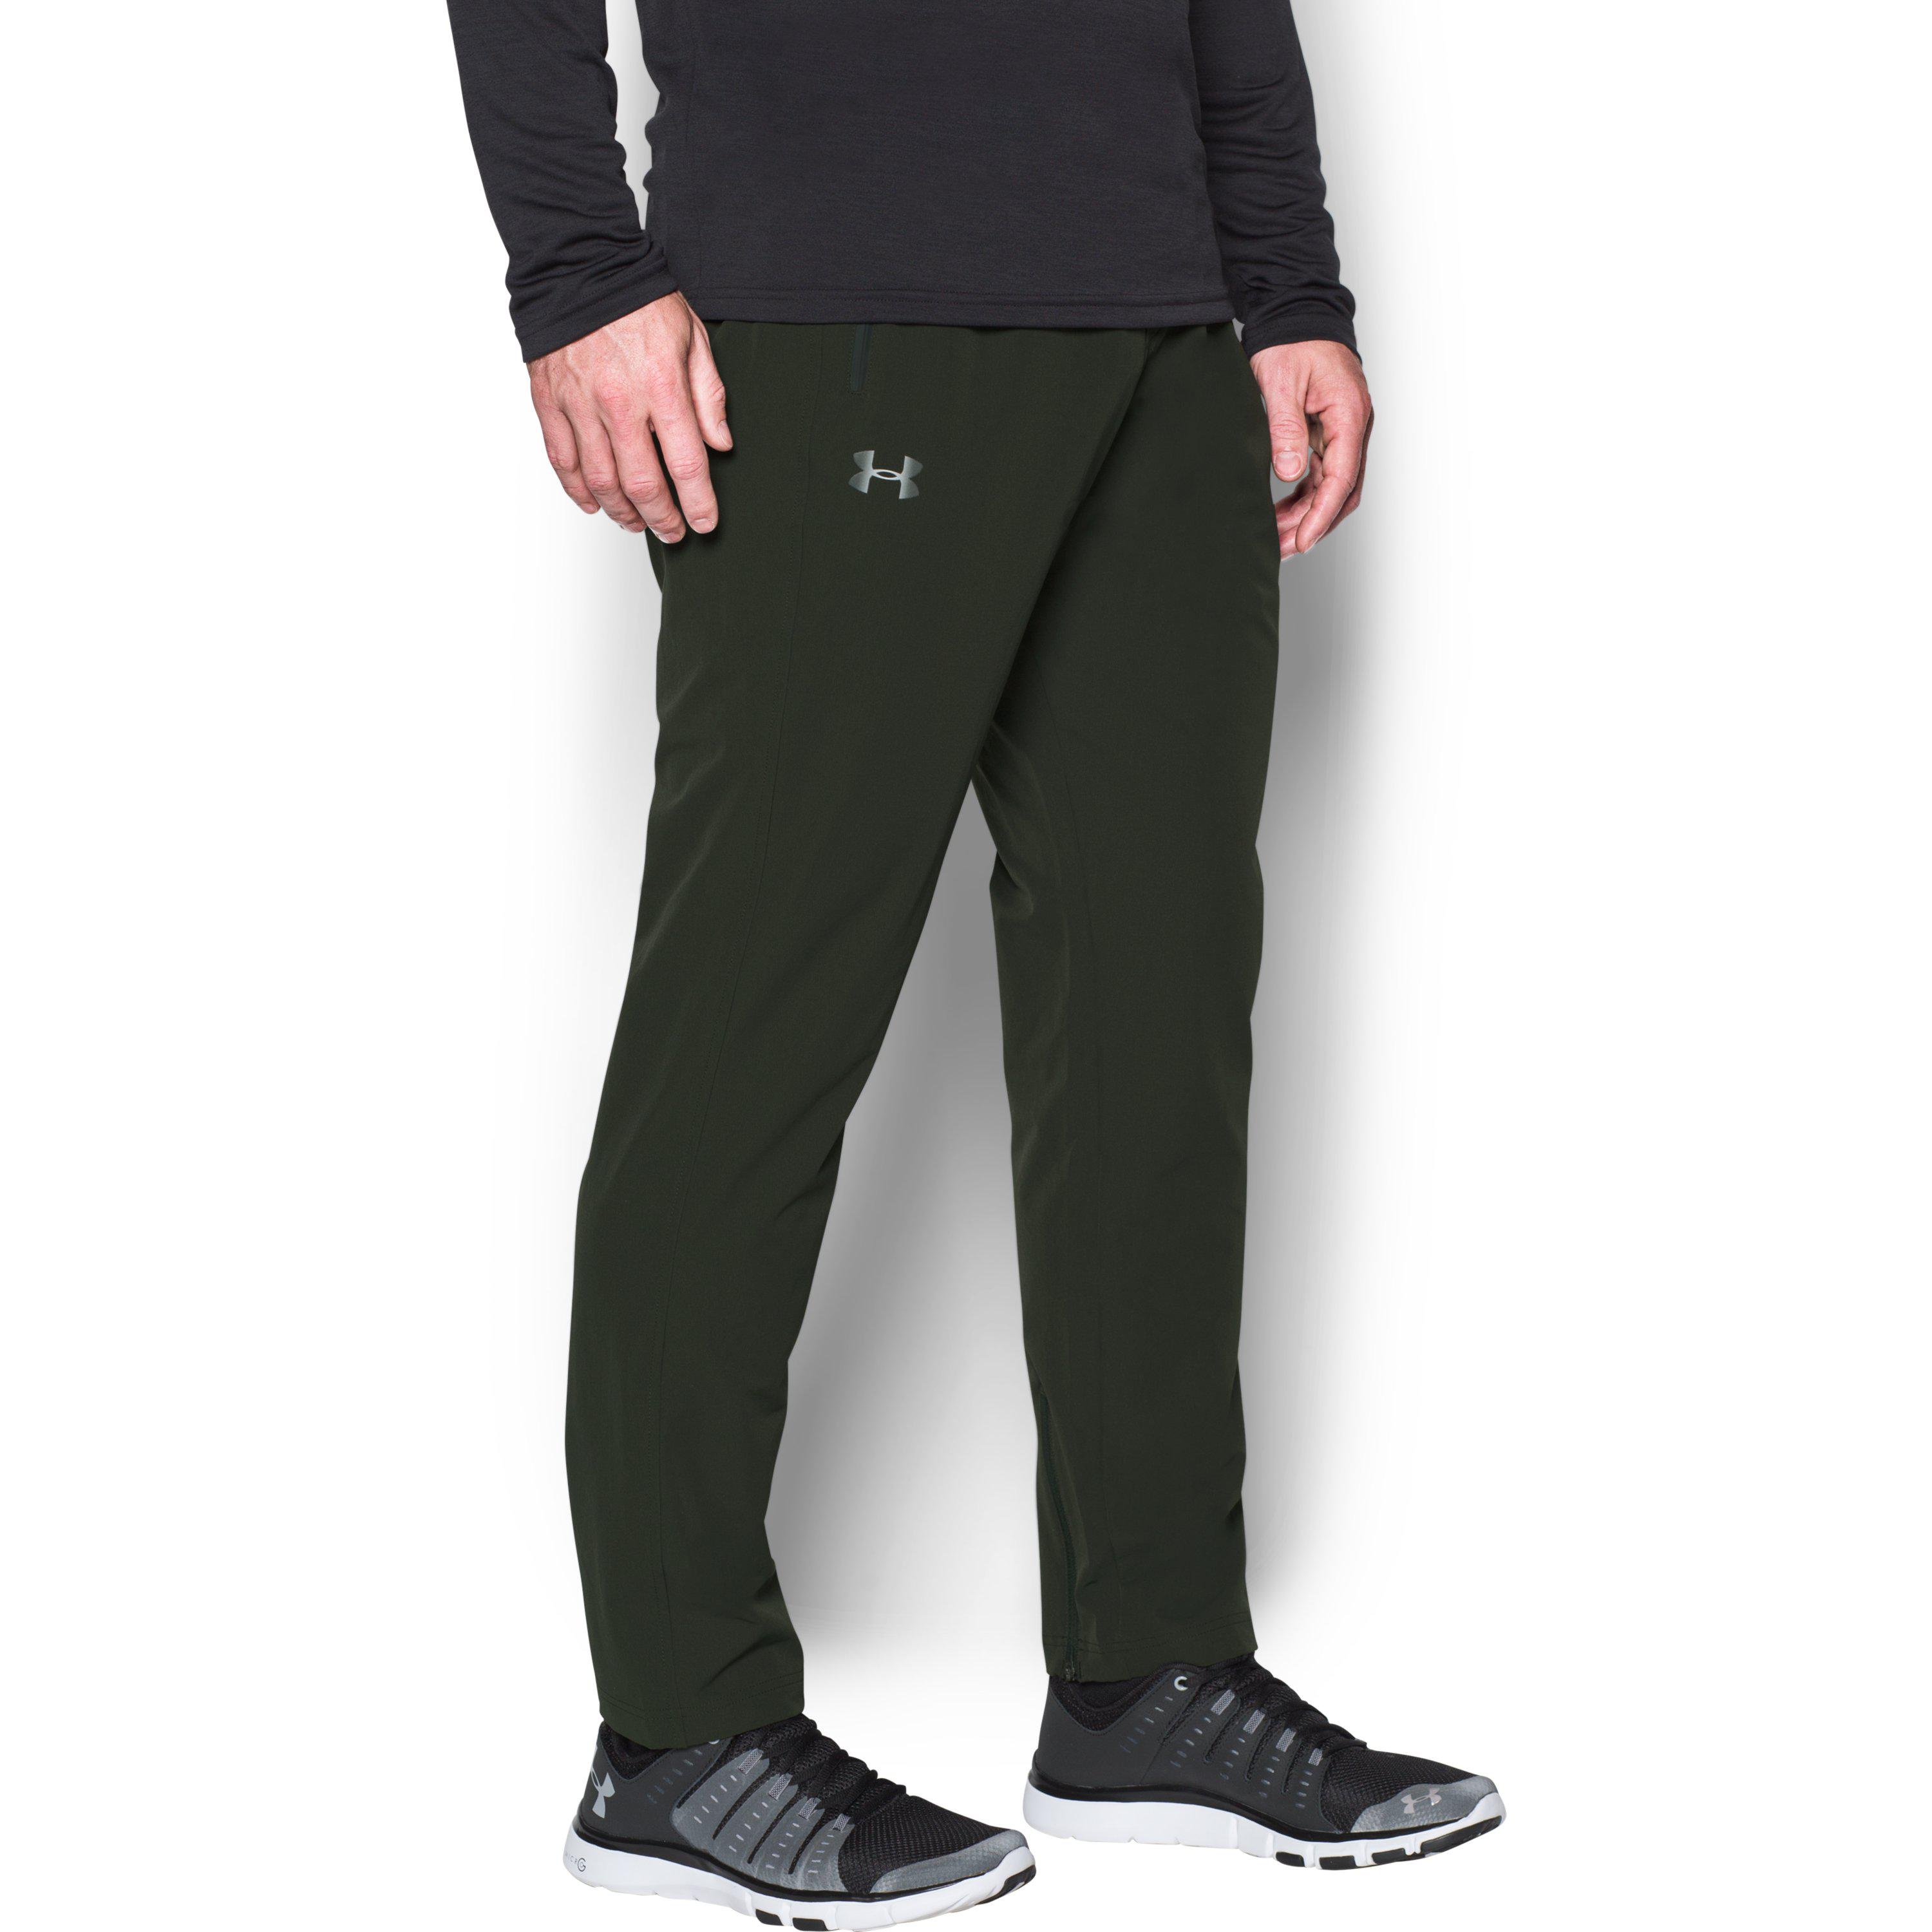 Under Armour Men's Ua Storm Woven Tapered Pants in Green for Men - Lyst